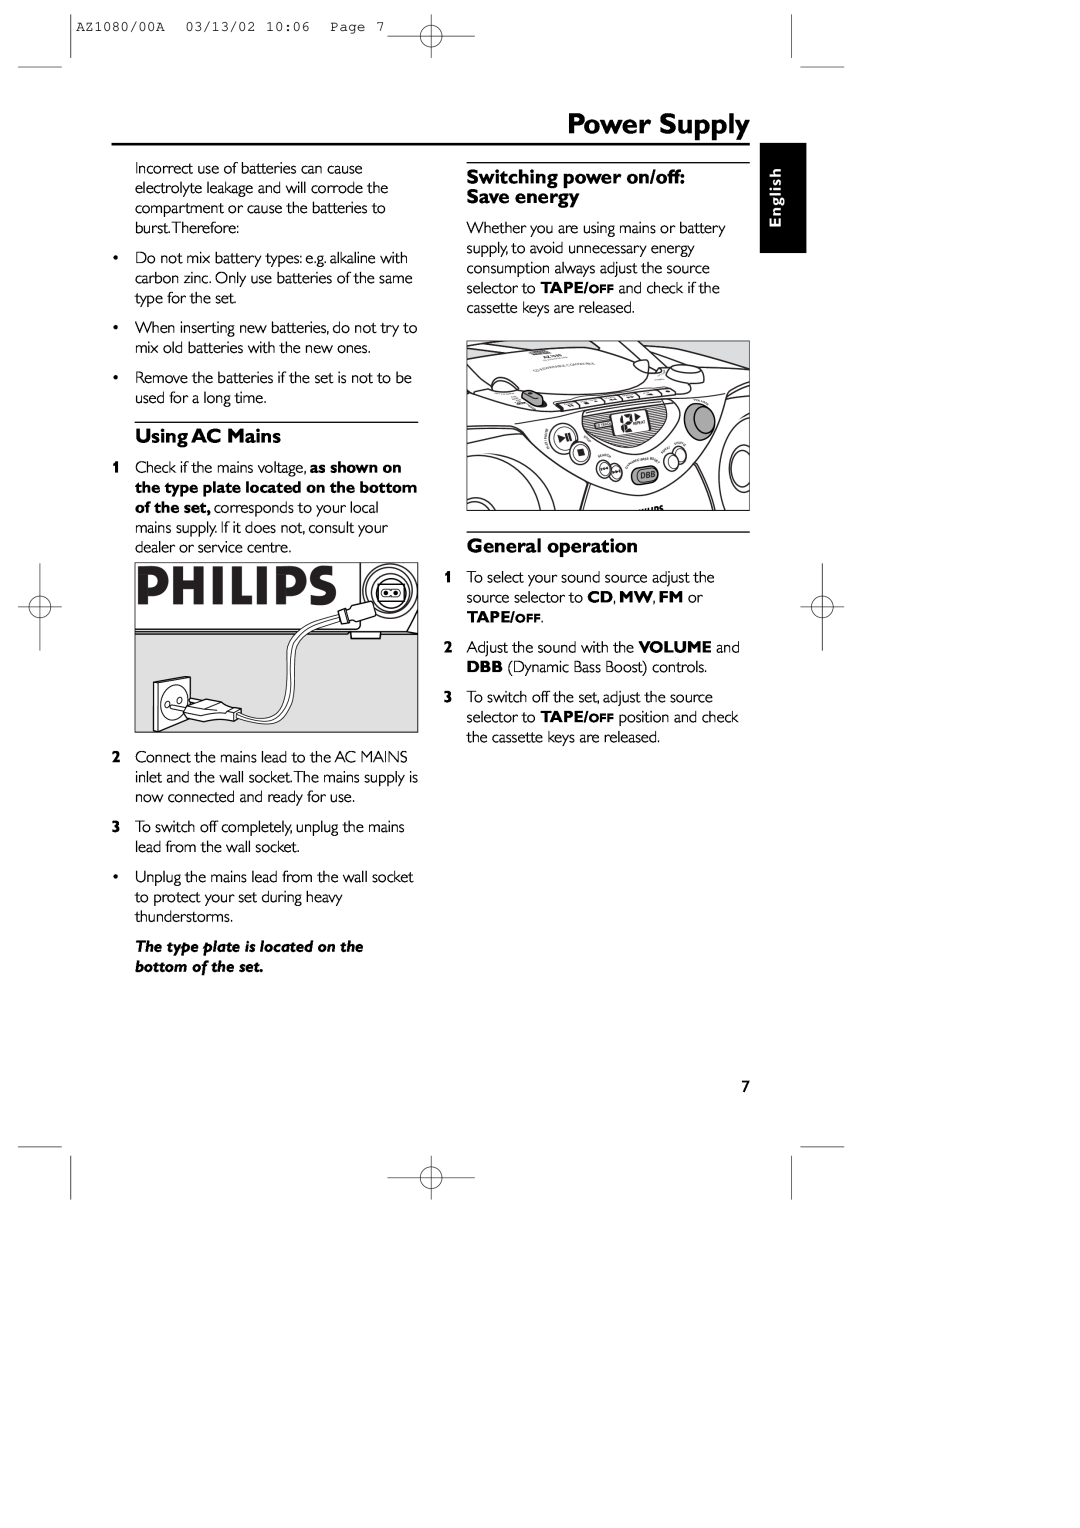 Philips AZ1080/00 manual Power Supply, Using AC Mains, Switching power on/off Save energy, General operation, English 